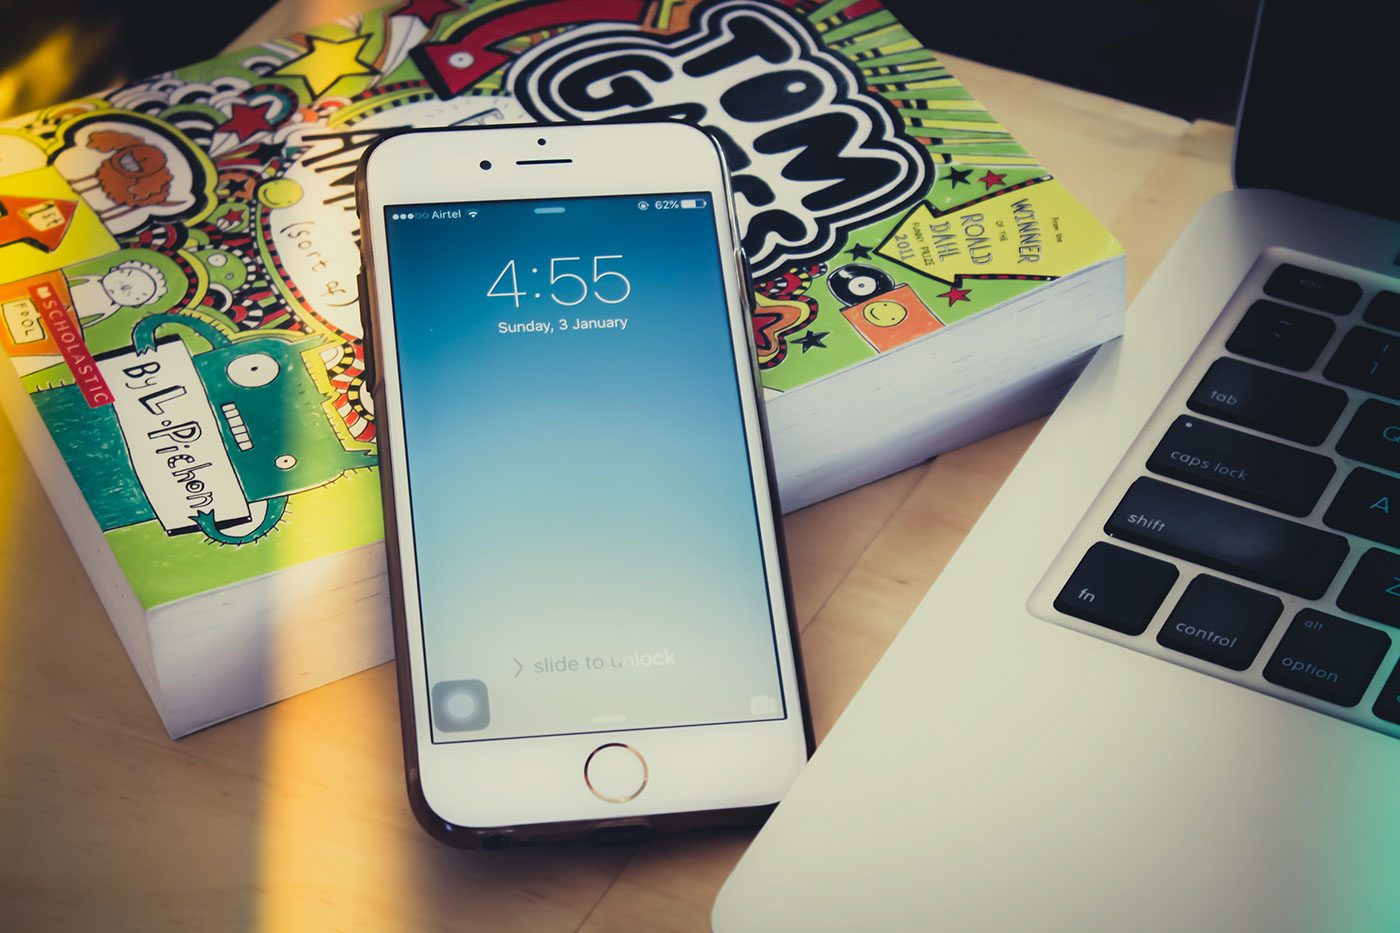 iphone Mockup free download realistic photo google drive link creative Perspective Tejas Srivathsa tejas Srivathsa